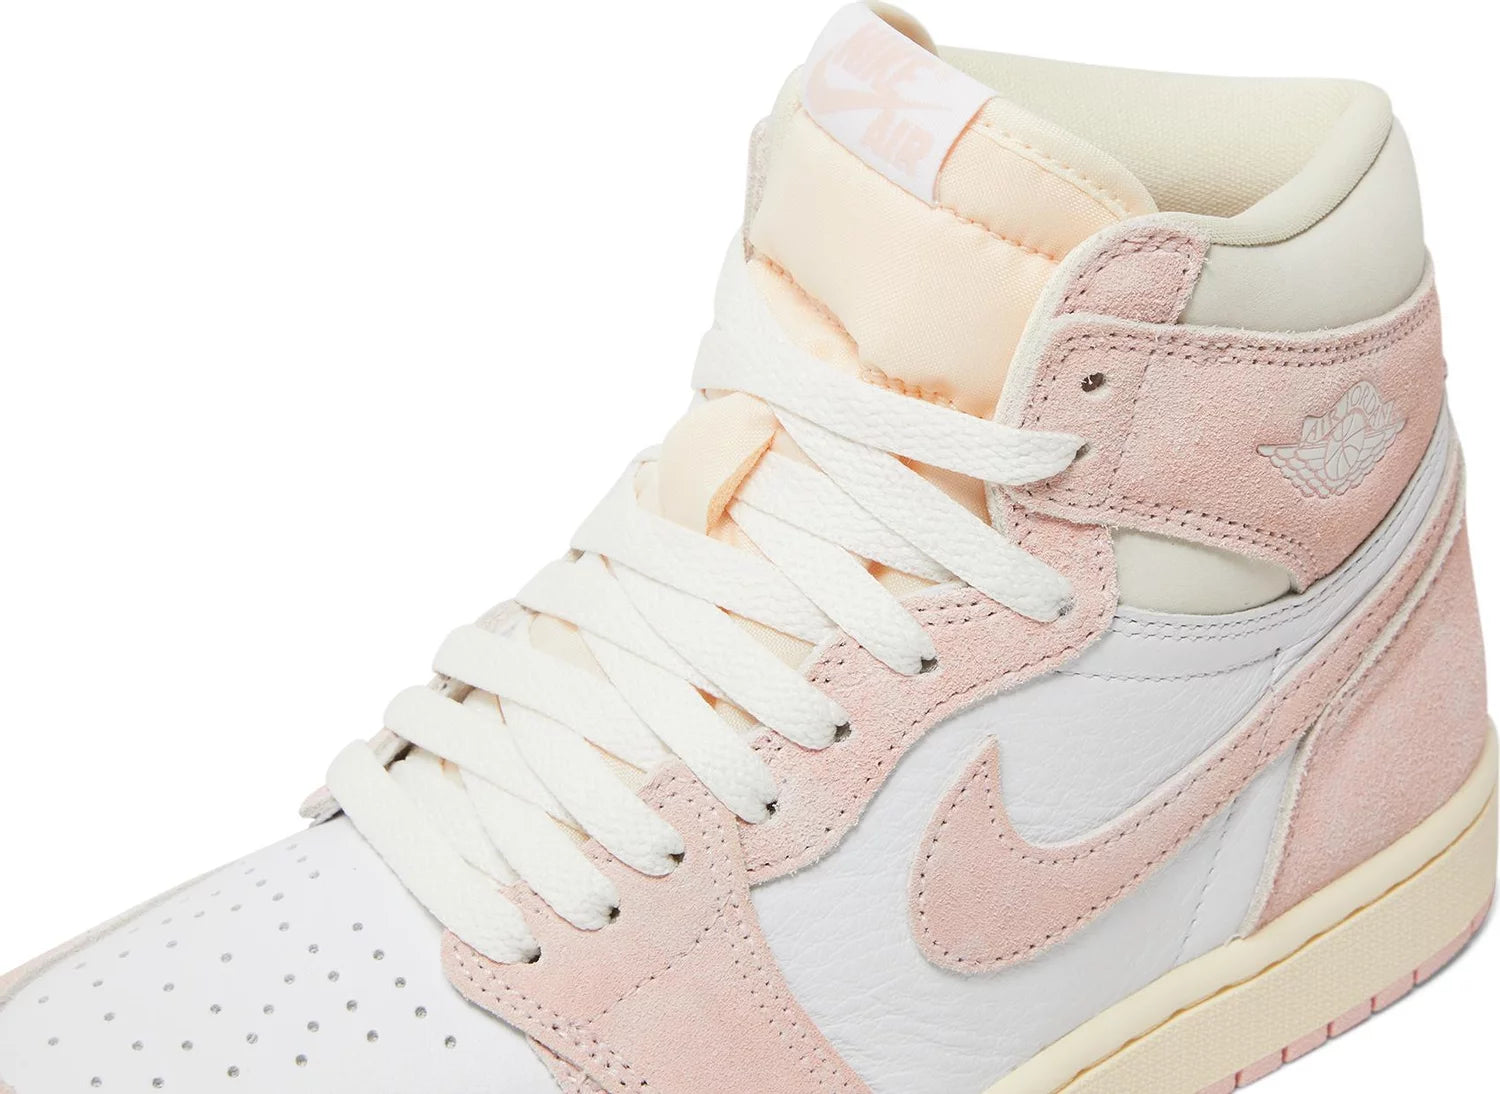 Double Boxed  179.99 Nike Air Jordan 1 High OG Washed Pink (W) Double Boxed